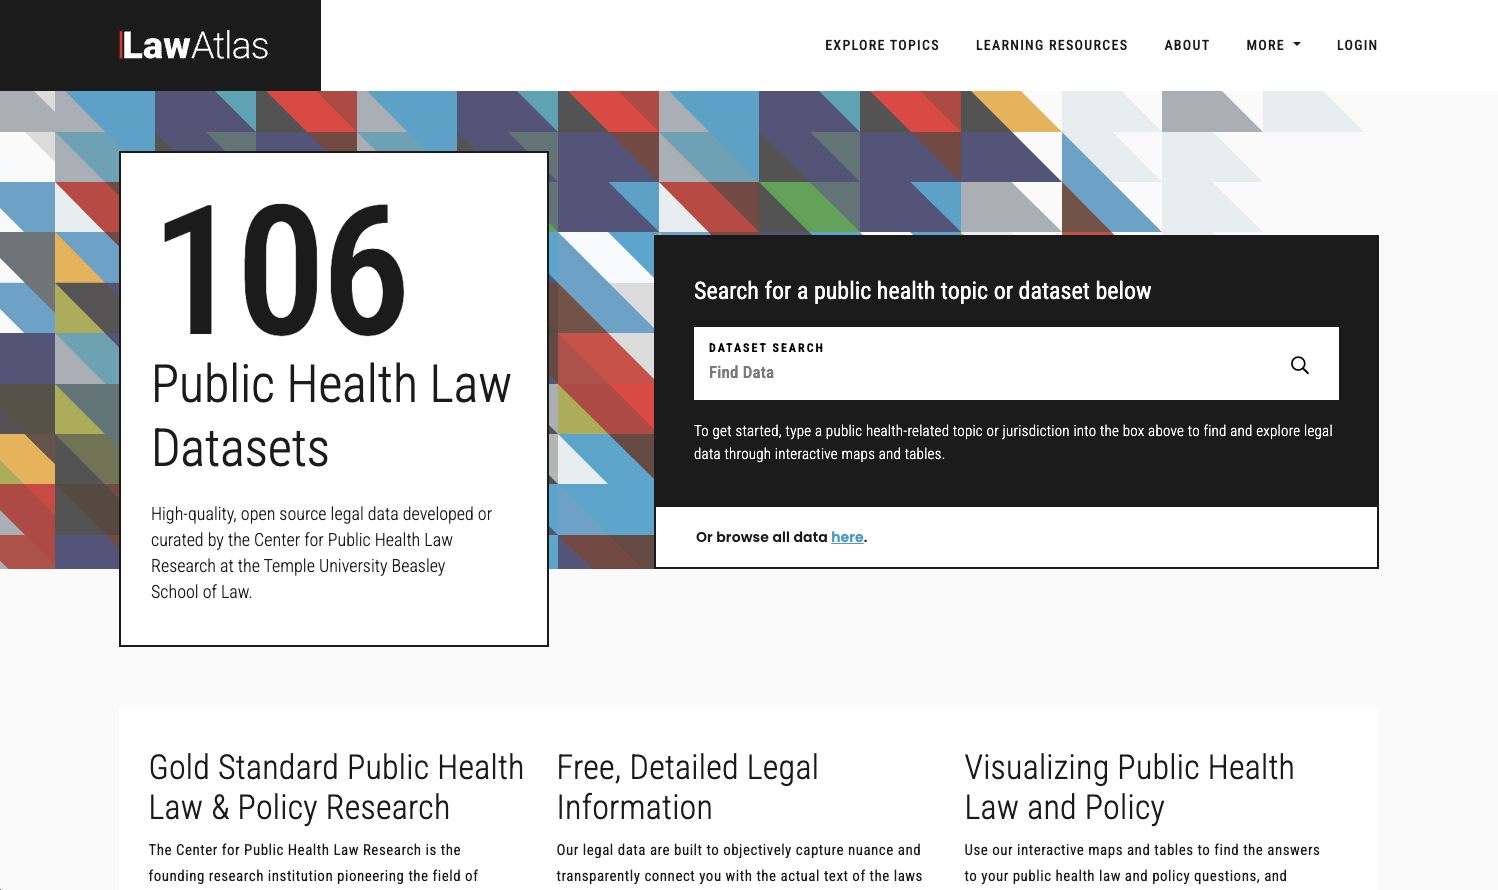 Hero image of the LawAtlas tool designed by Graphicacy for Temple University's Center for Public Health Law Research.